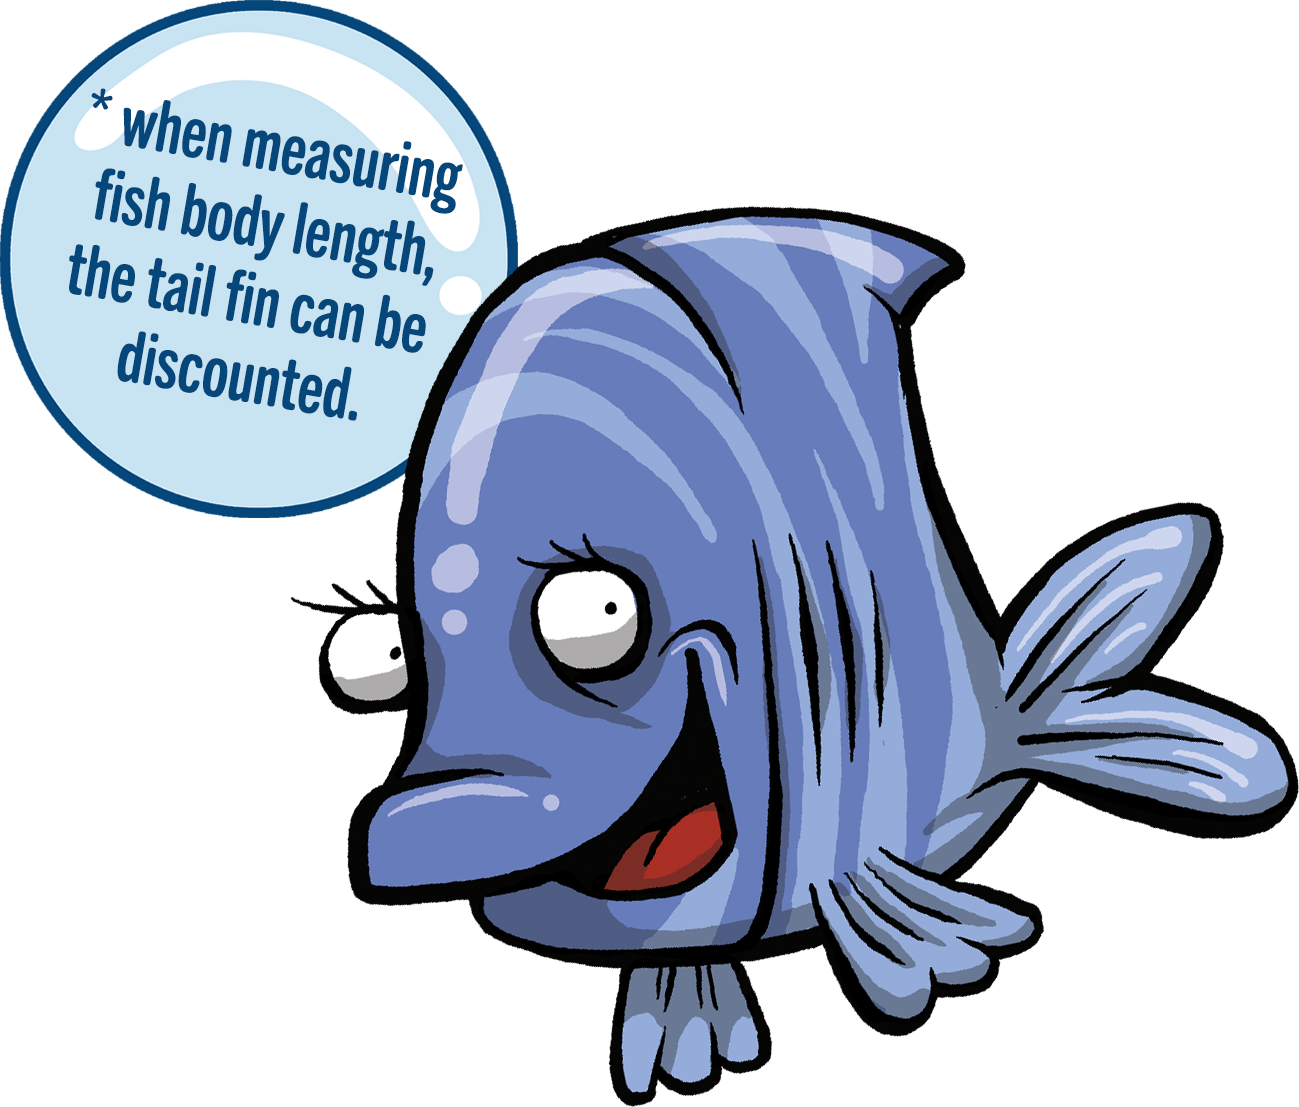 *when measuring fish body length, the tail fin can be discounted.